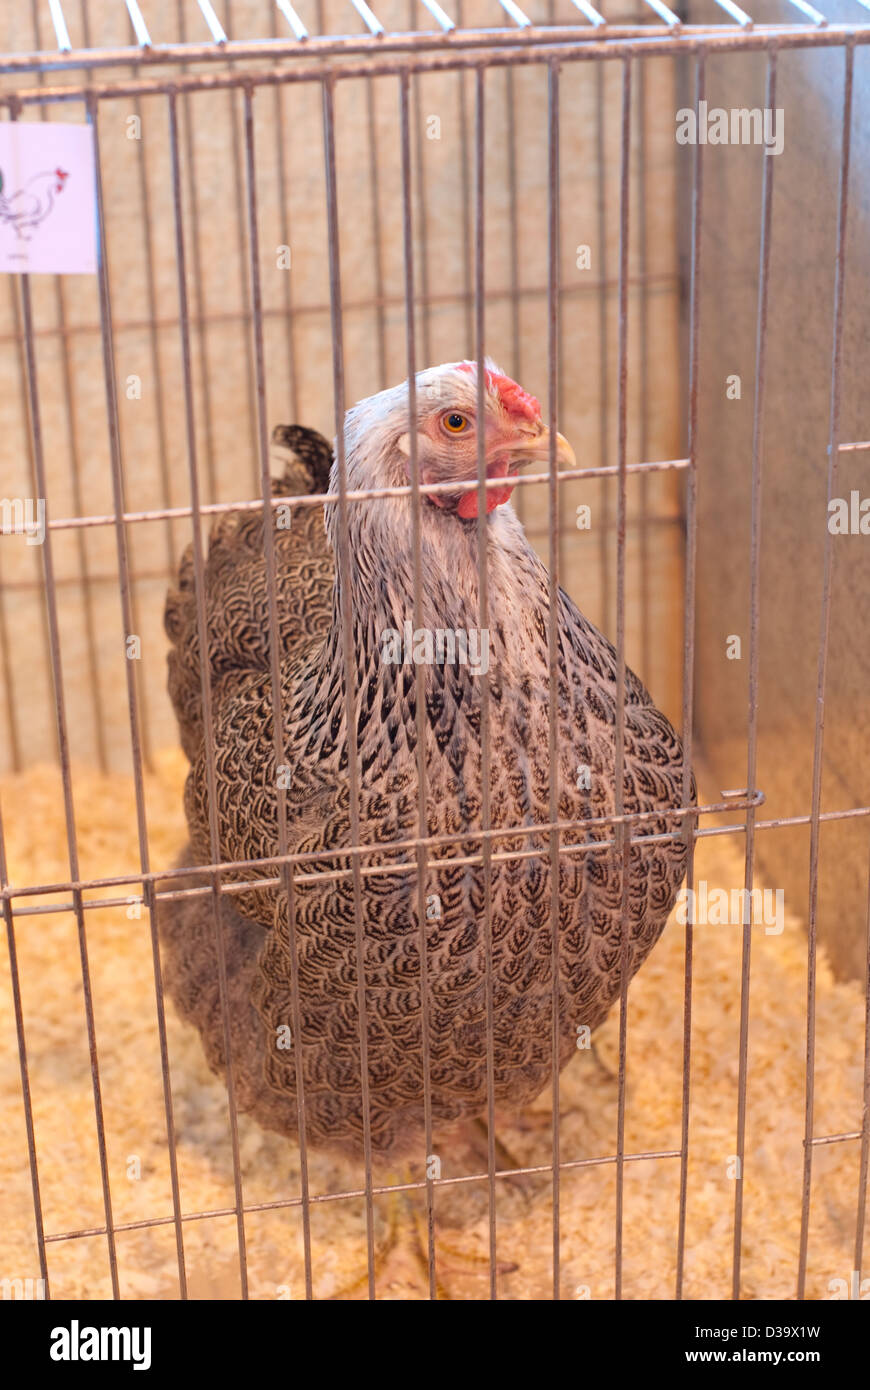 A chicken in a cage at a poultry show Stock Photo